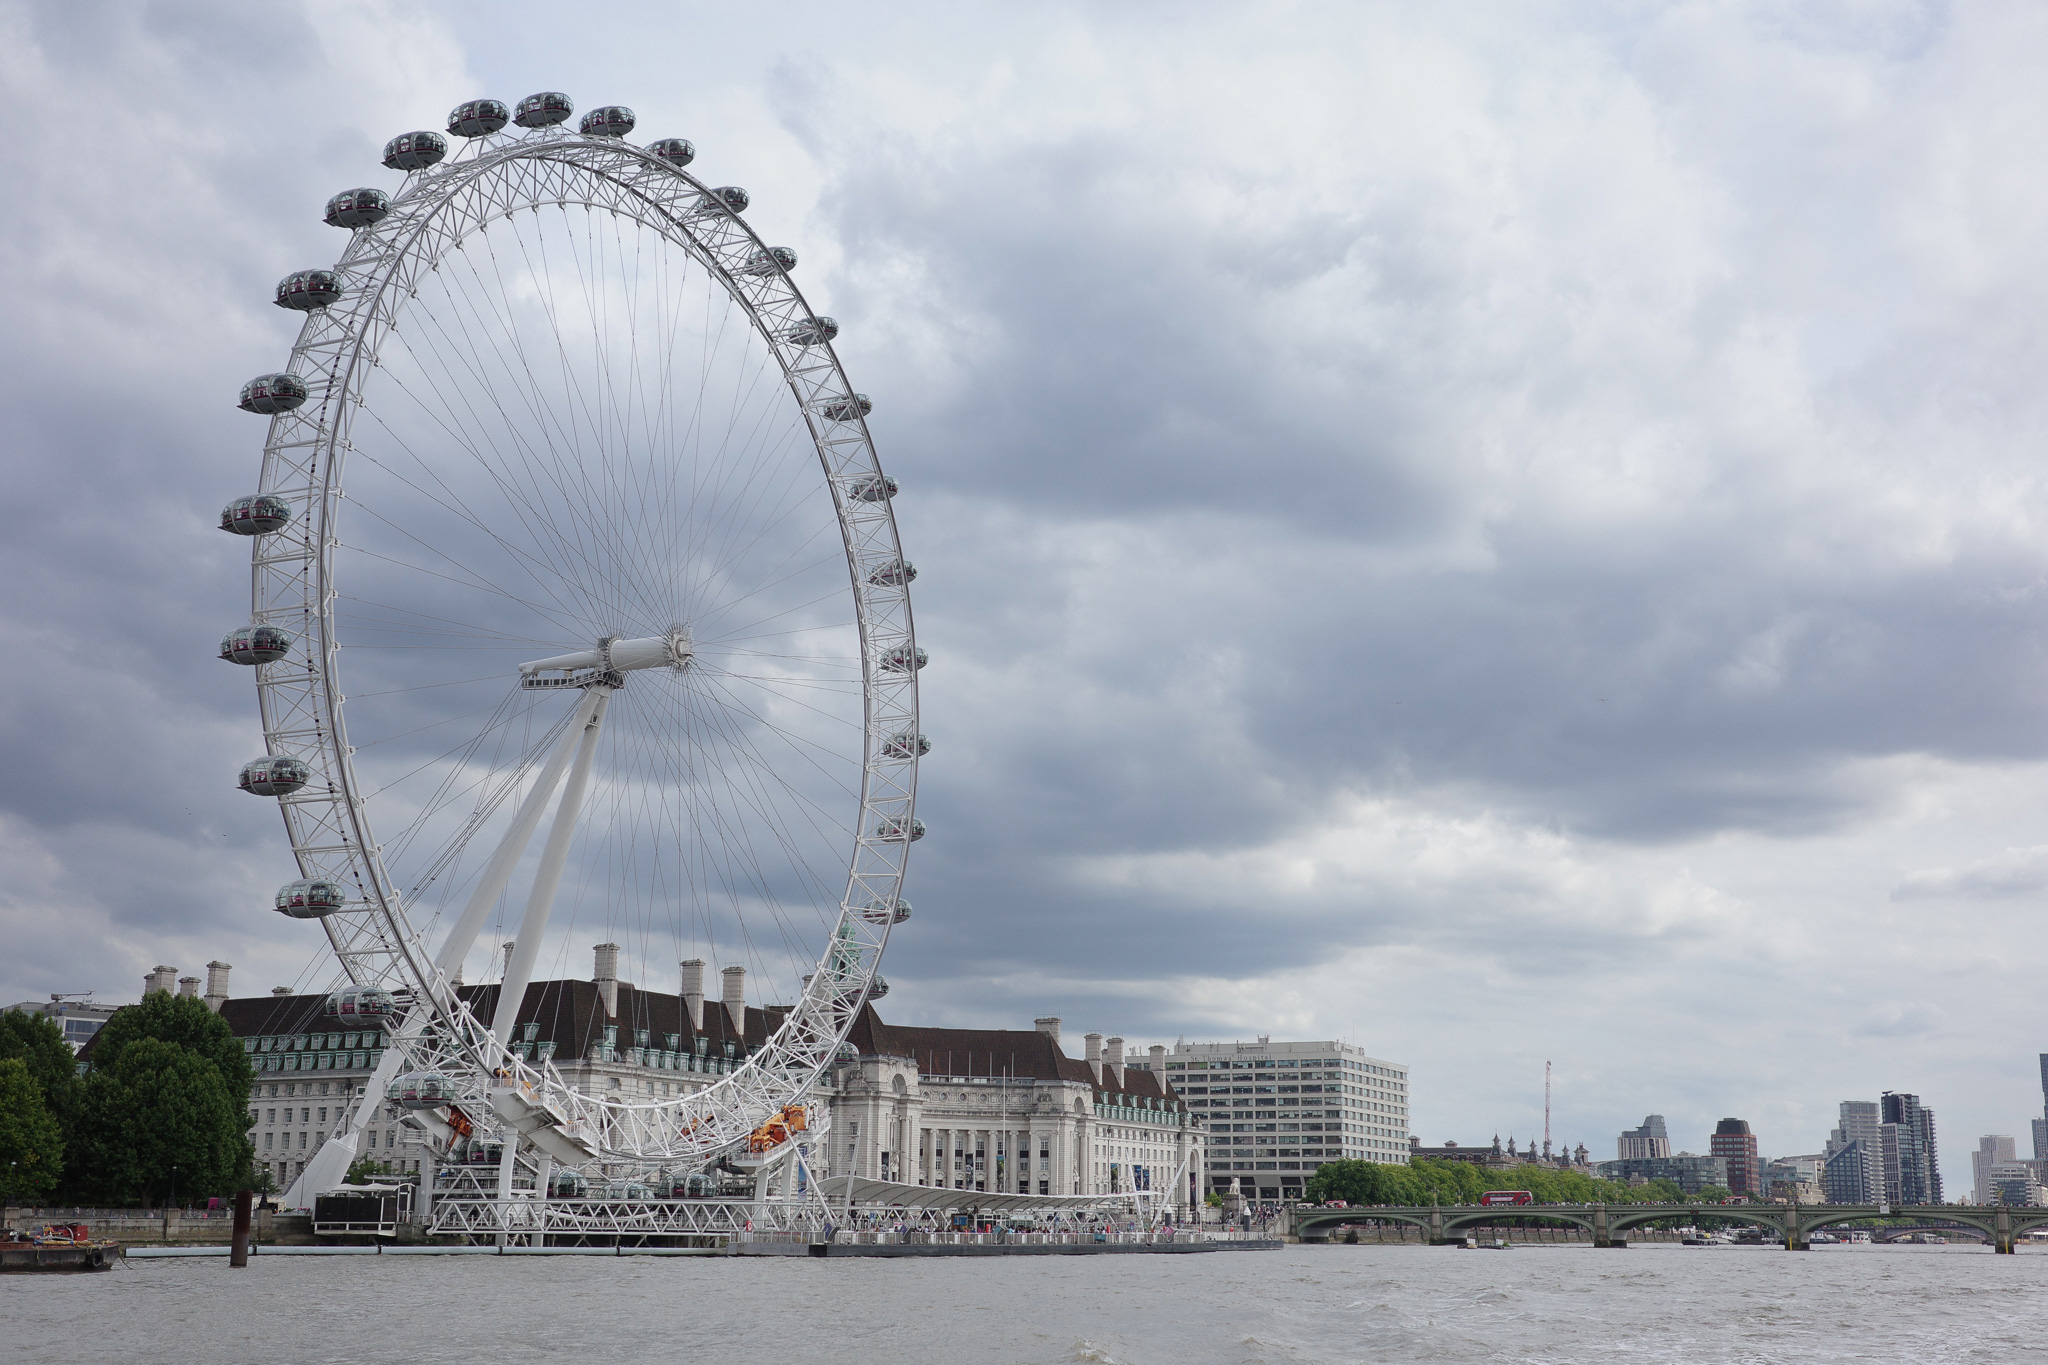 Top 5 iconic photography locations in London